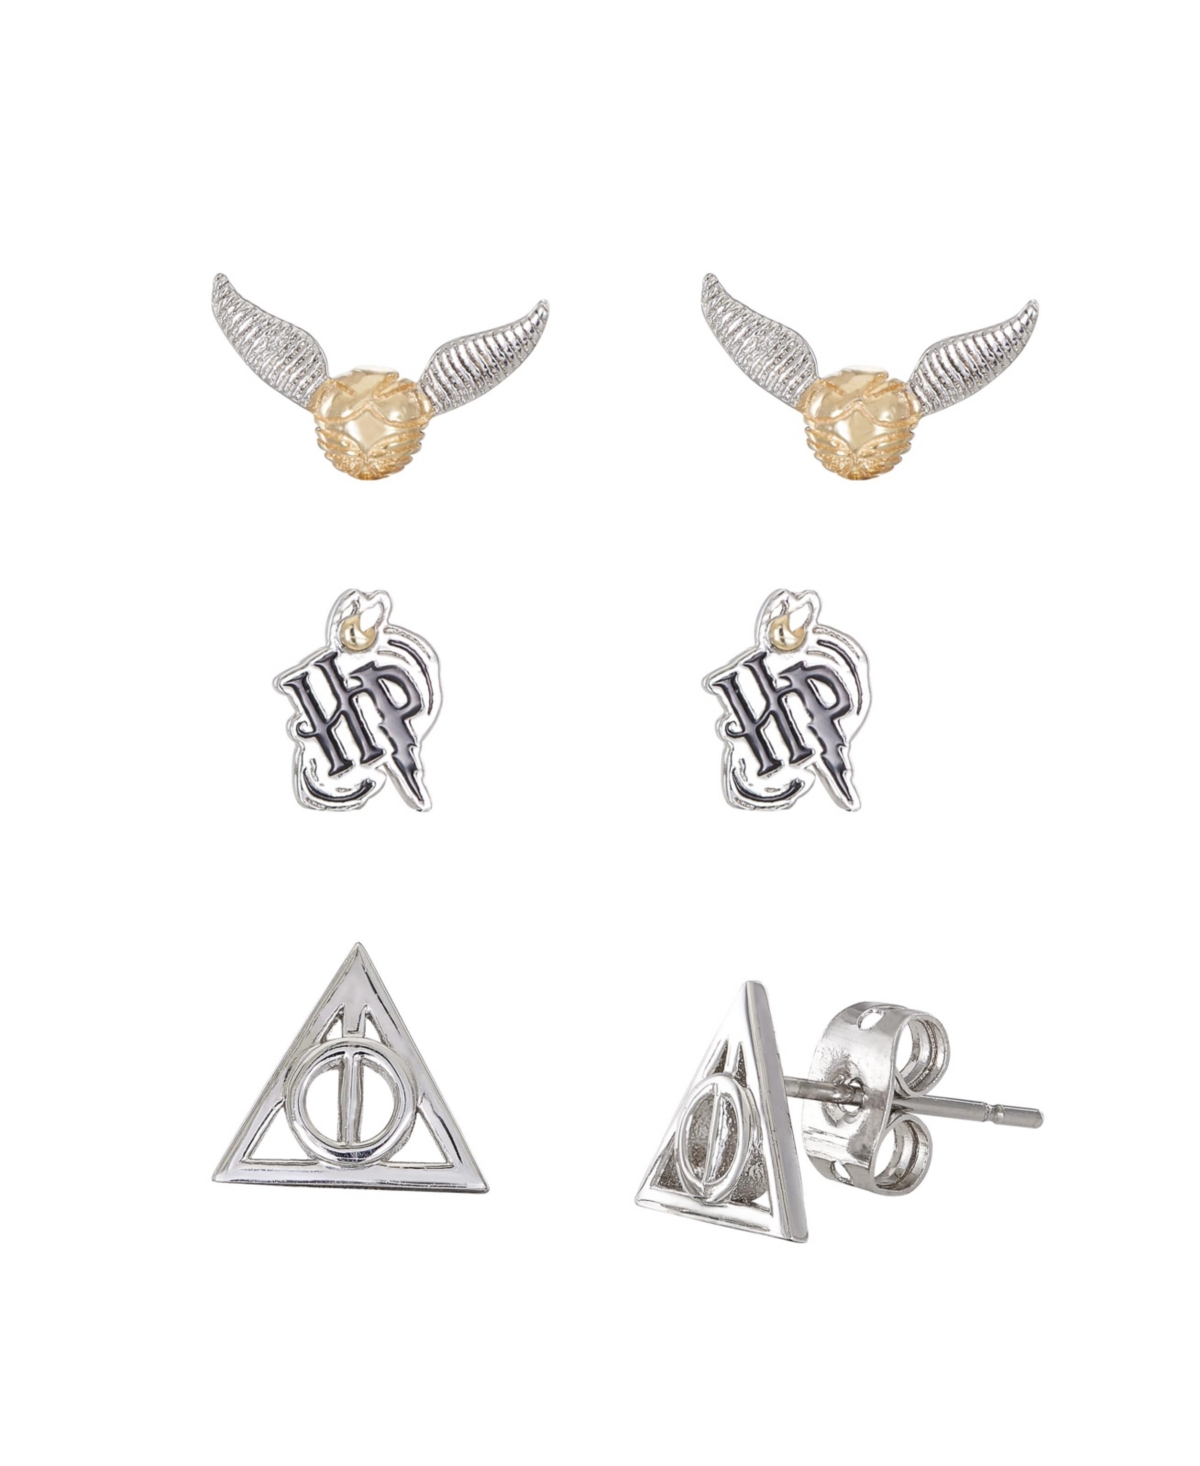 Silver Plated Stud Earrings Set Hp, Deathly Hallows, and Golden Snitch- 3 Pairs - Silver tone, black, gold tone